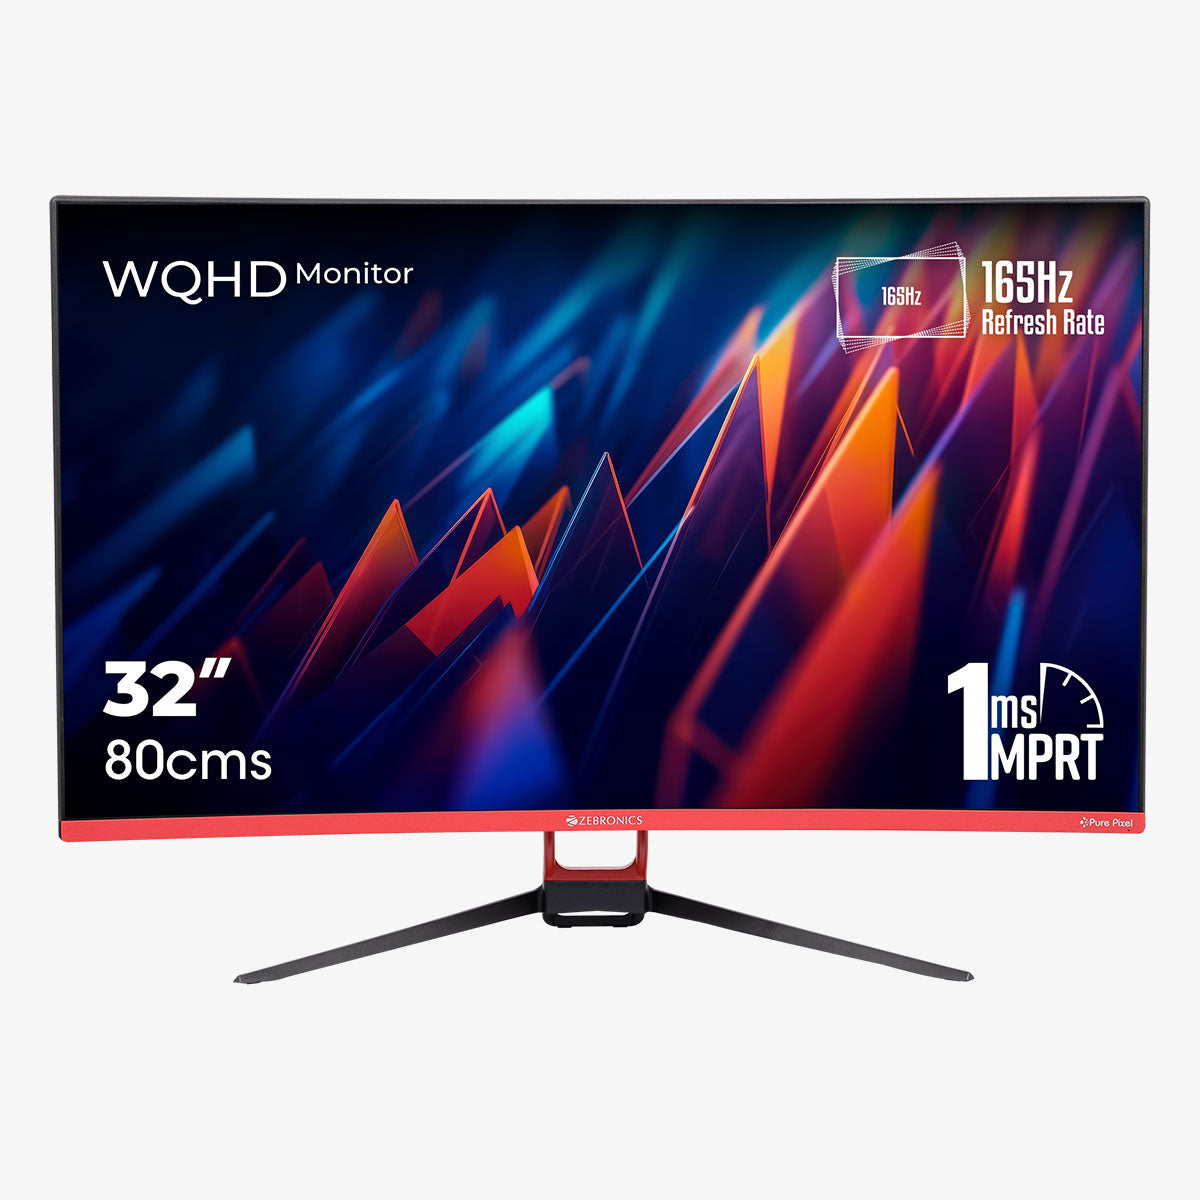 S32A (165Hz) LED Monitor